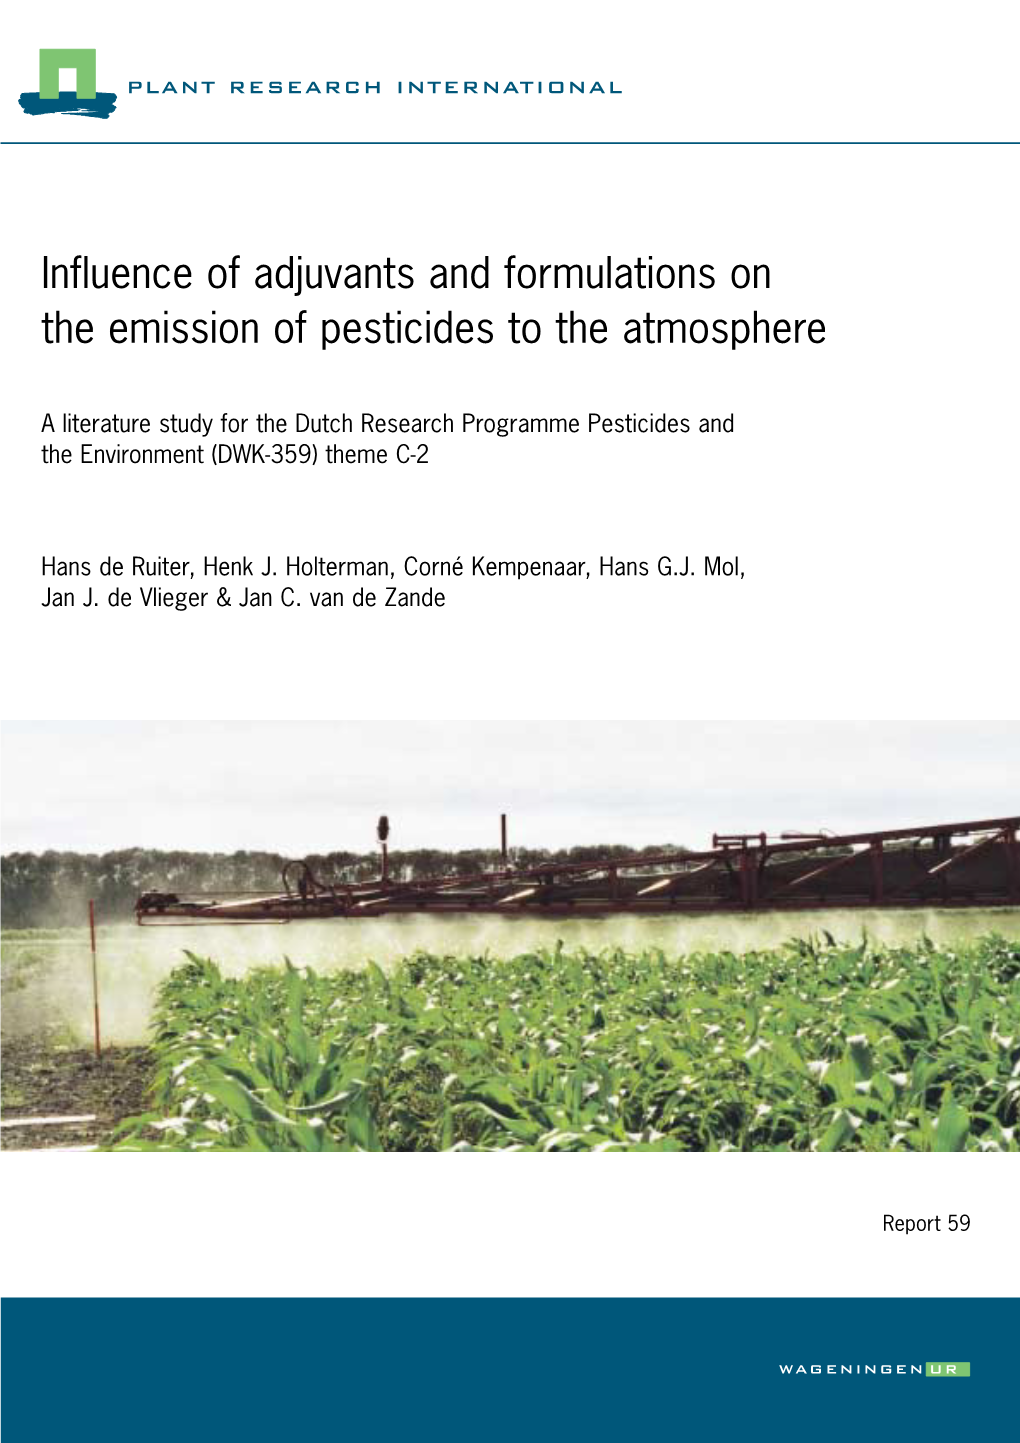 Influence of Adjuvants and Formulations on the Emission of Pesticides to the Atmosphere